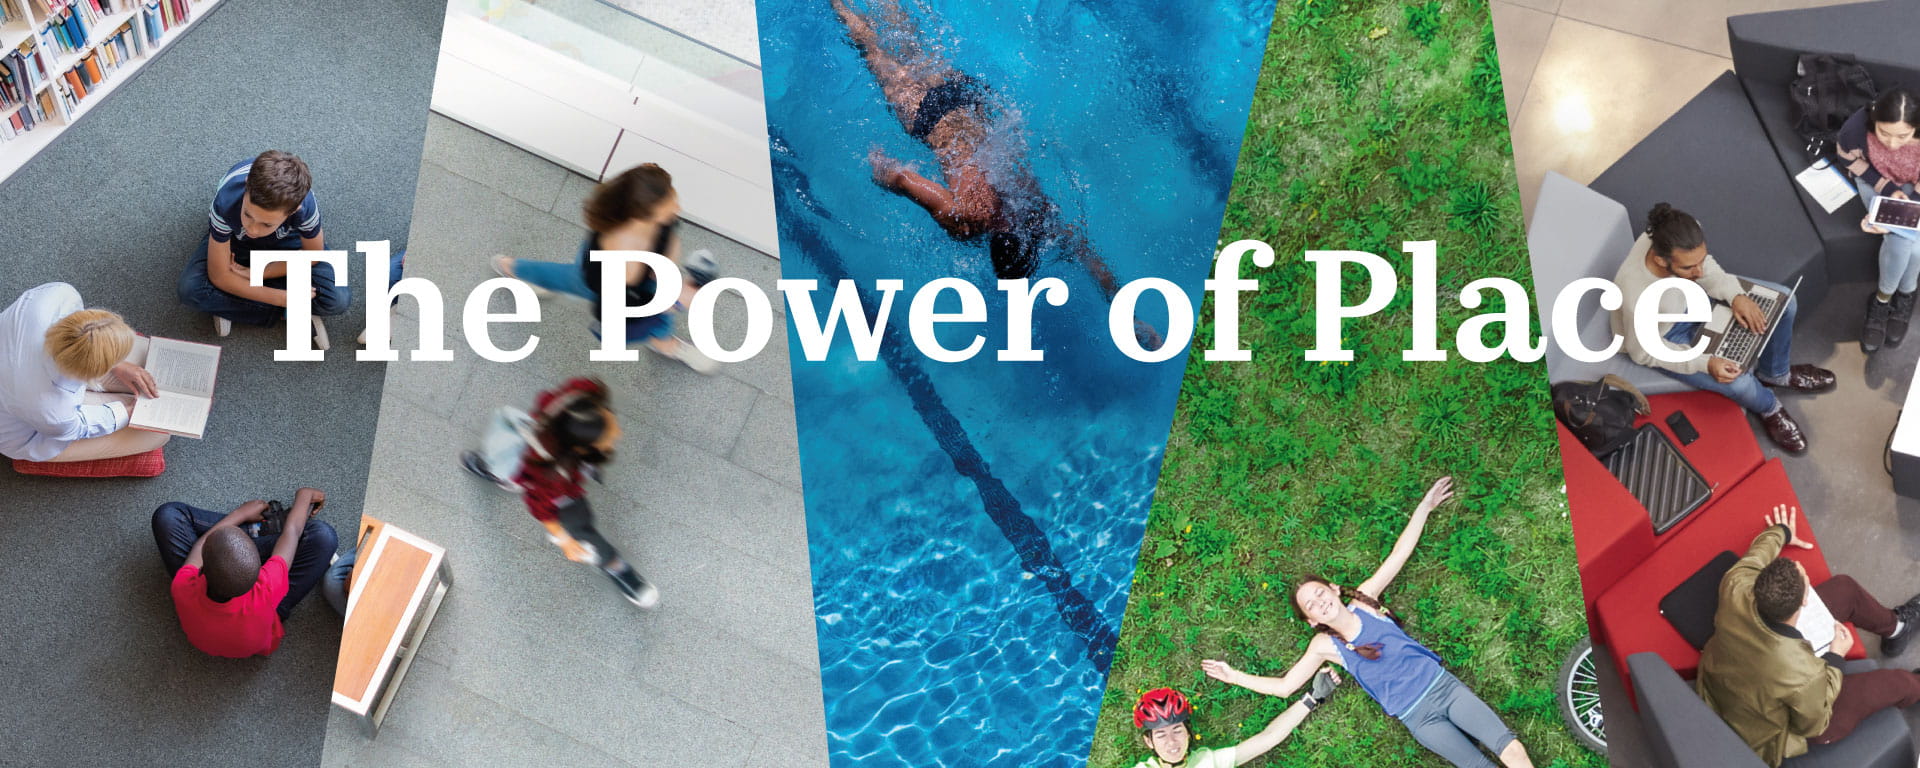 The Power of Place | ISG